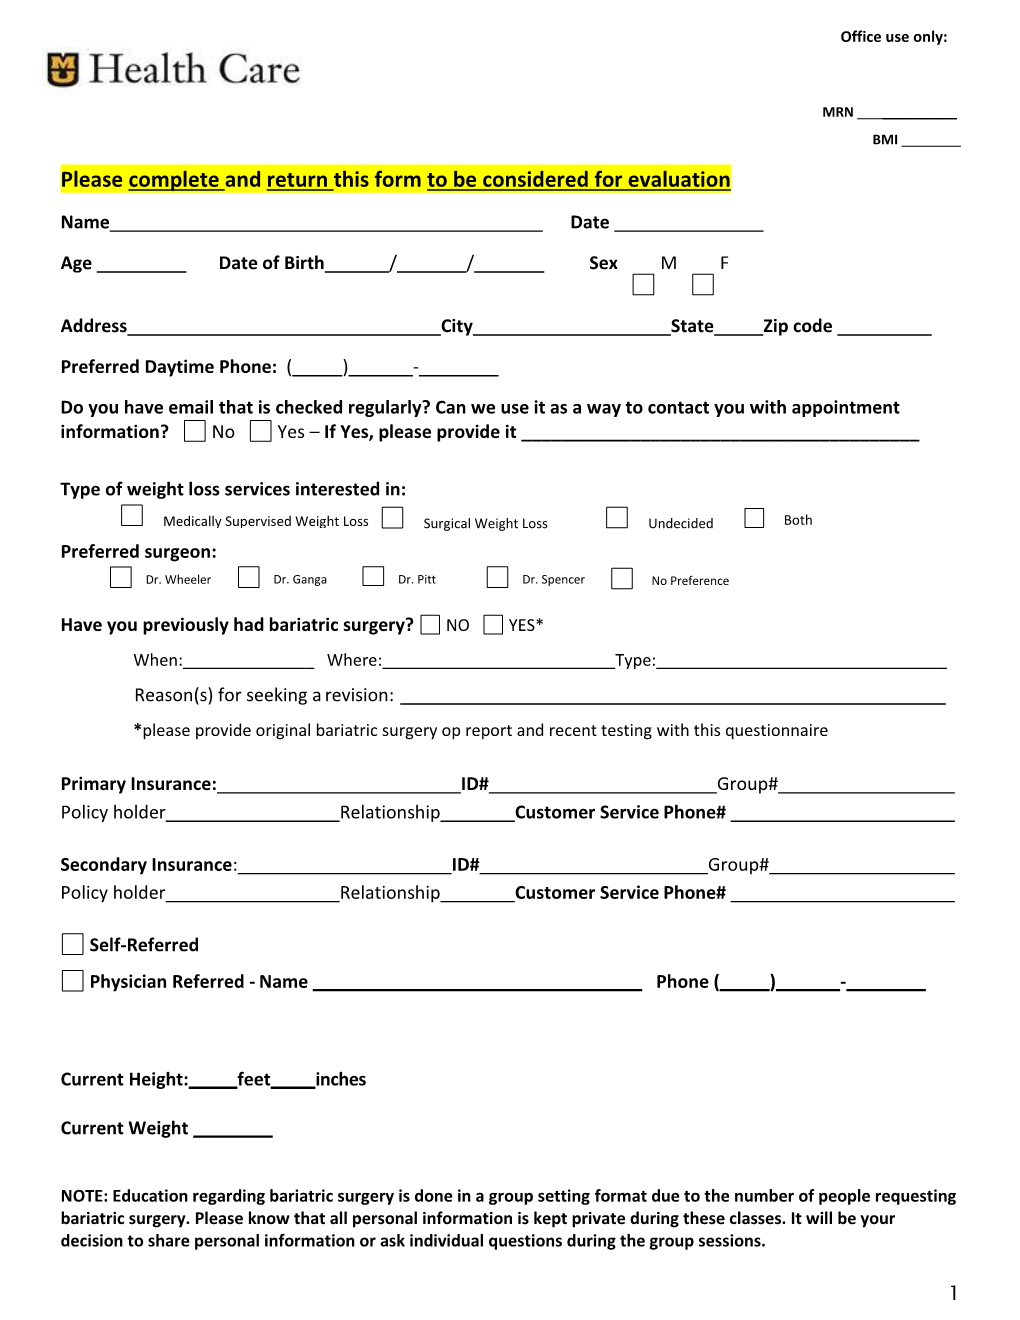 Please Complete and Return This Form to Be Considered for Evaluation